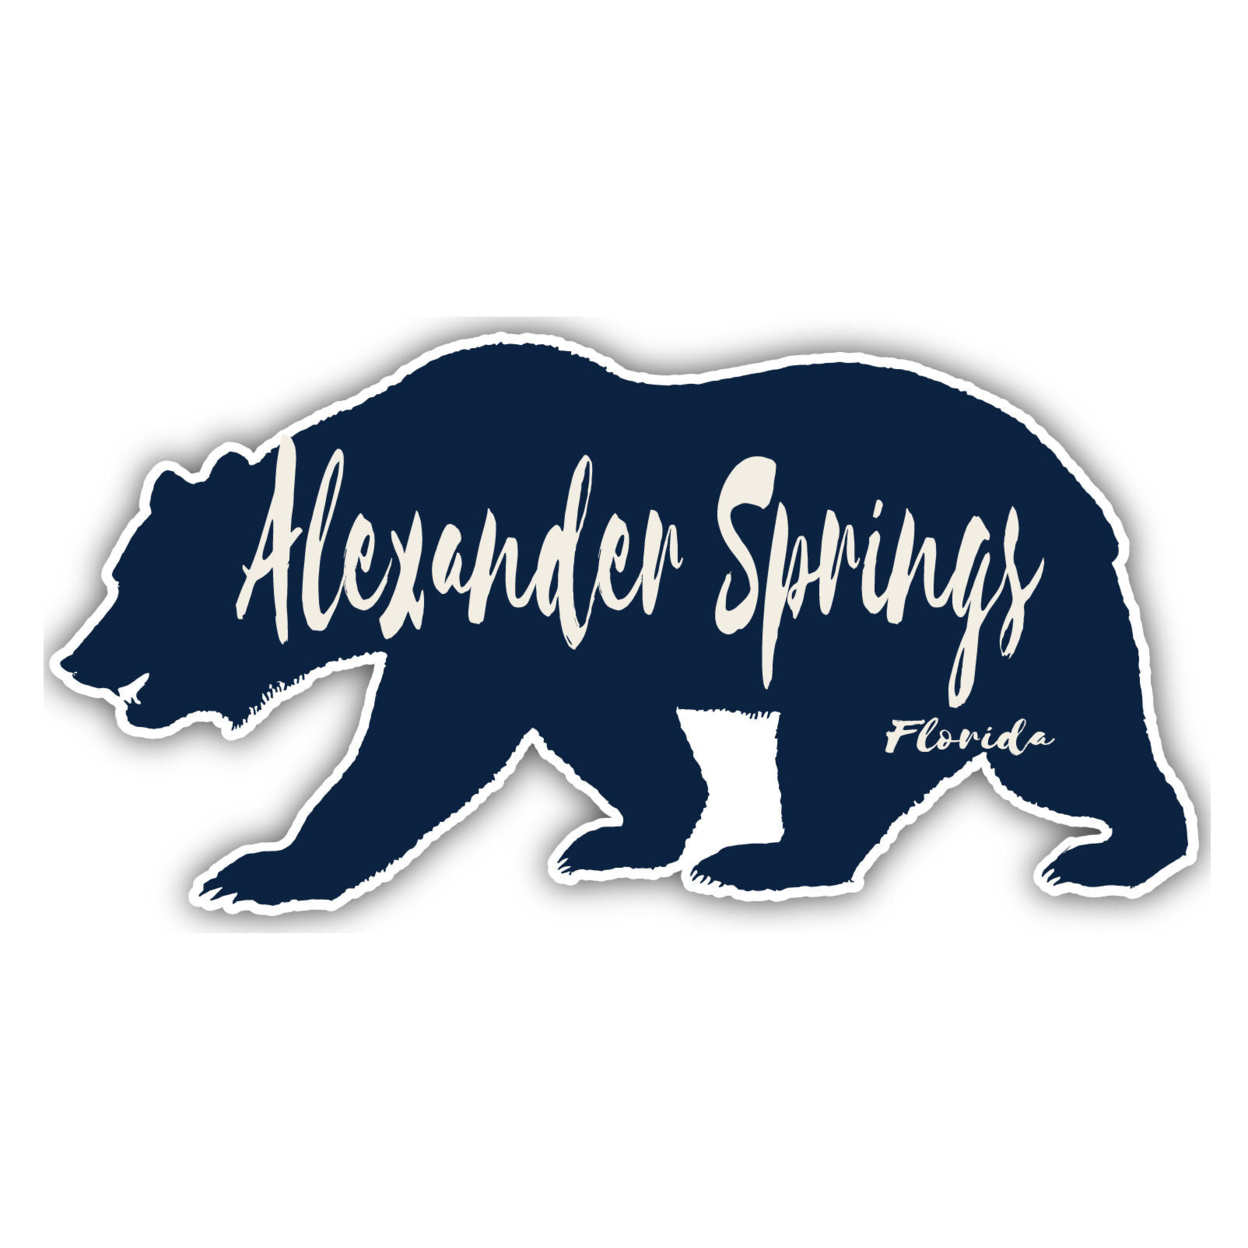 Alexander Springs Florida Souvenir Decorative Stickers (Choose Theme And Size) - 4-Pack, 8-Inch, Camp Life